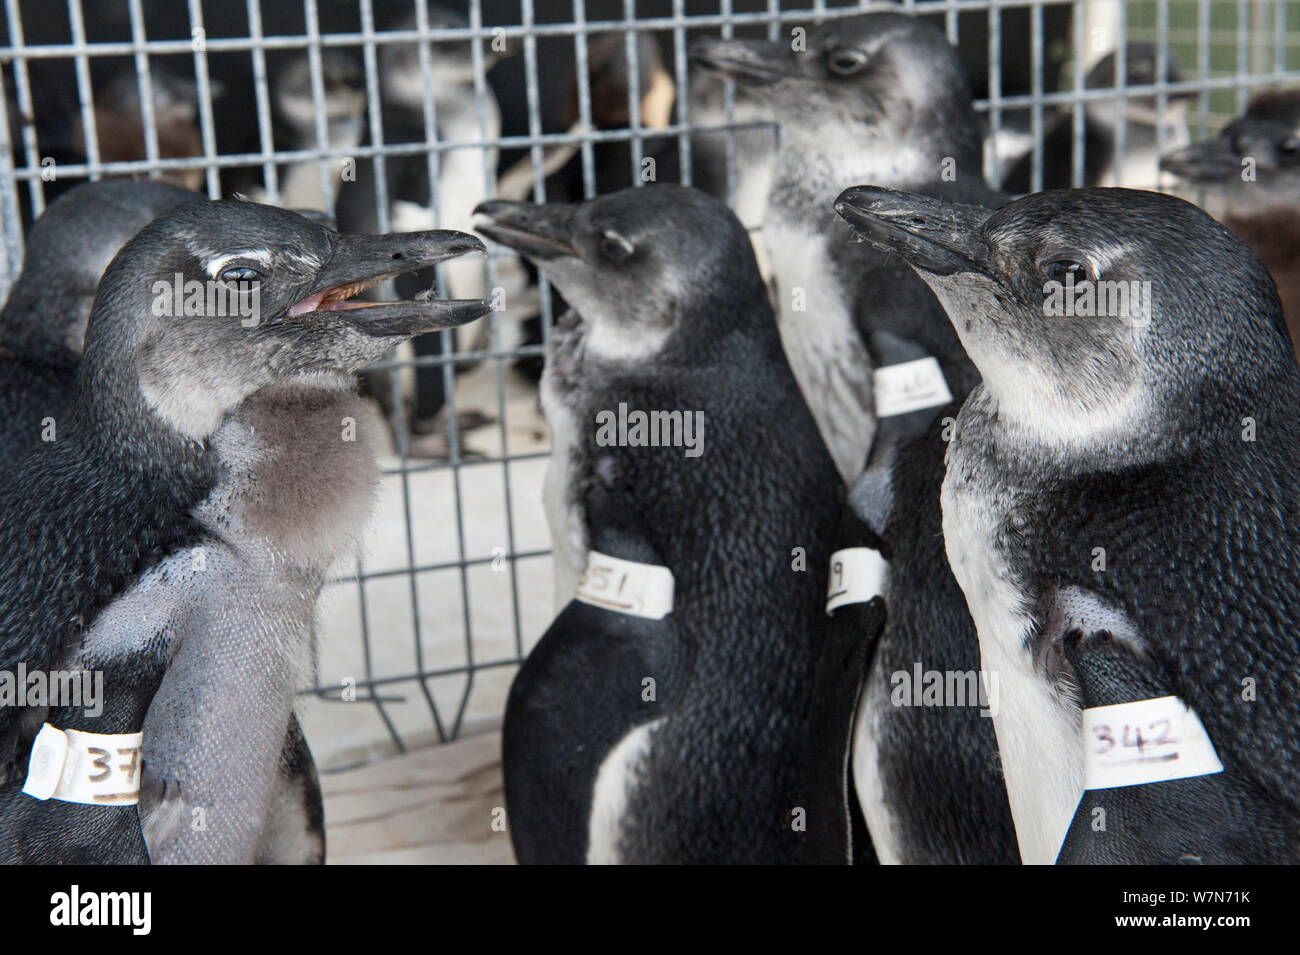 Black footed penguins (Spheniscus demersus) tagged and in rehabilitation at Southern African Foundation for the Conservation of Coastal Birds (SANCCOB) Cape Town, South Africa Stock Photo